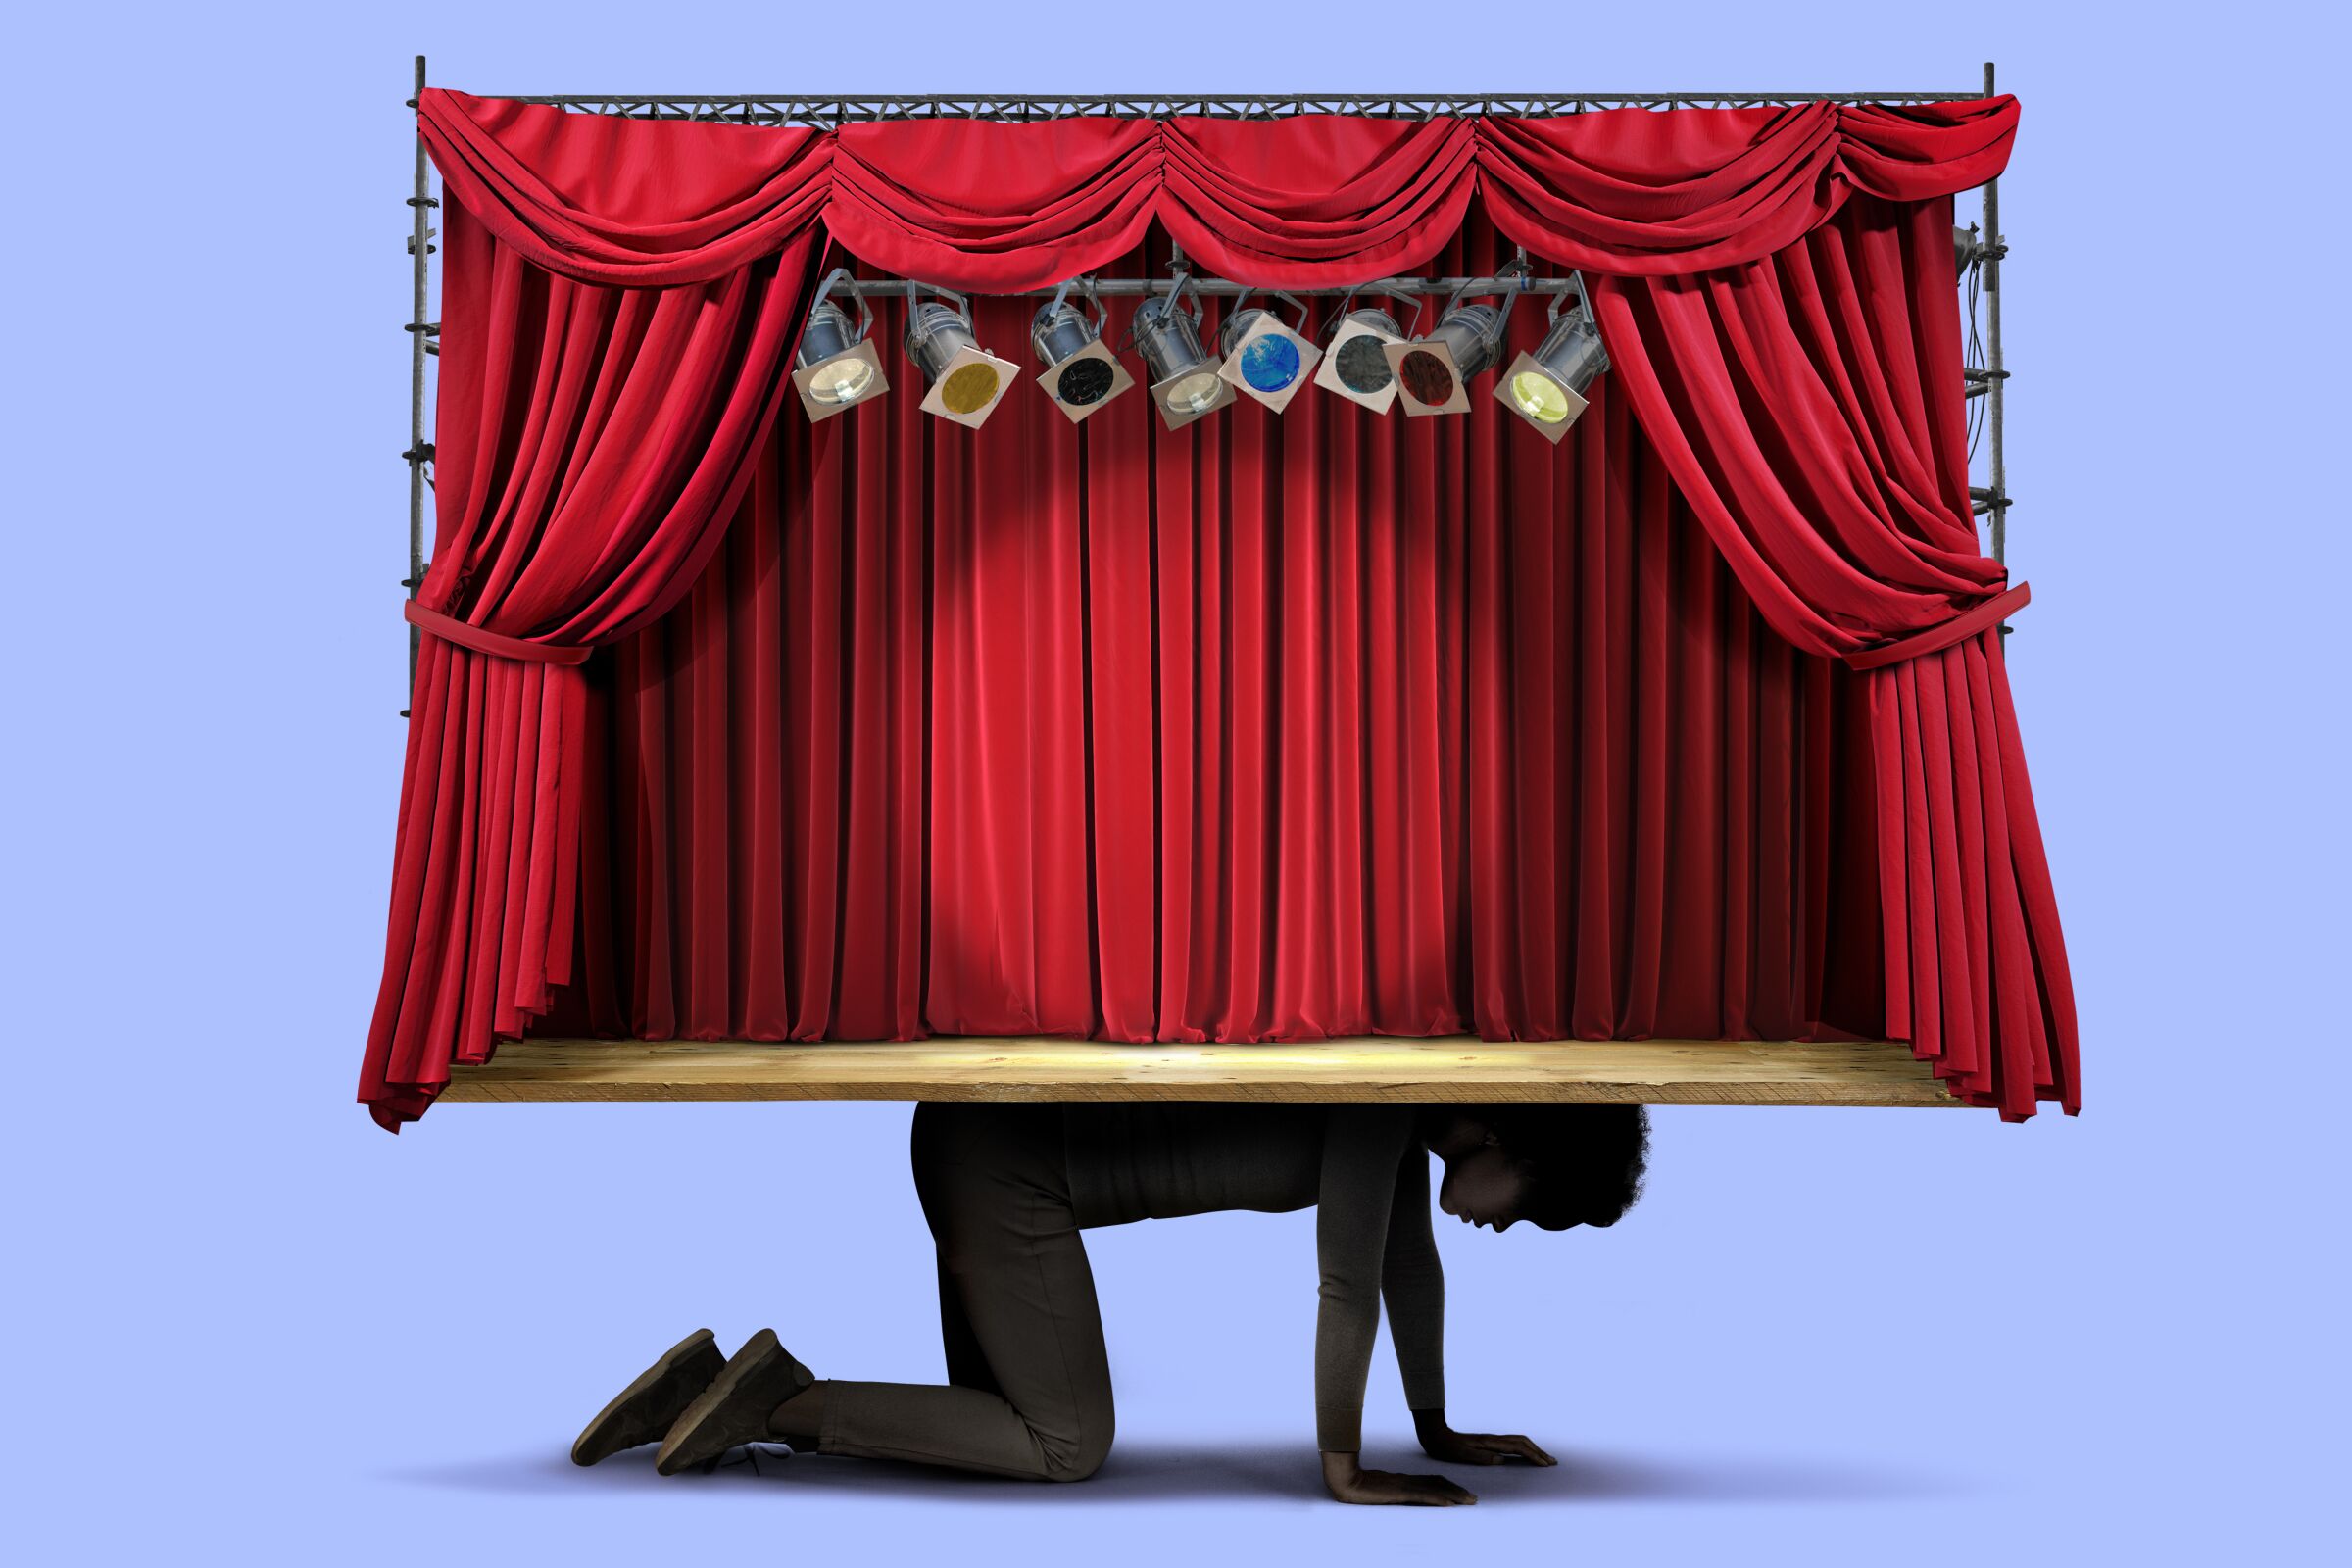 An illustration of a theater stage sitting on a person's back.